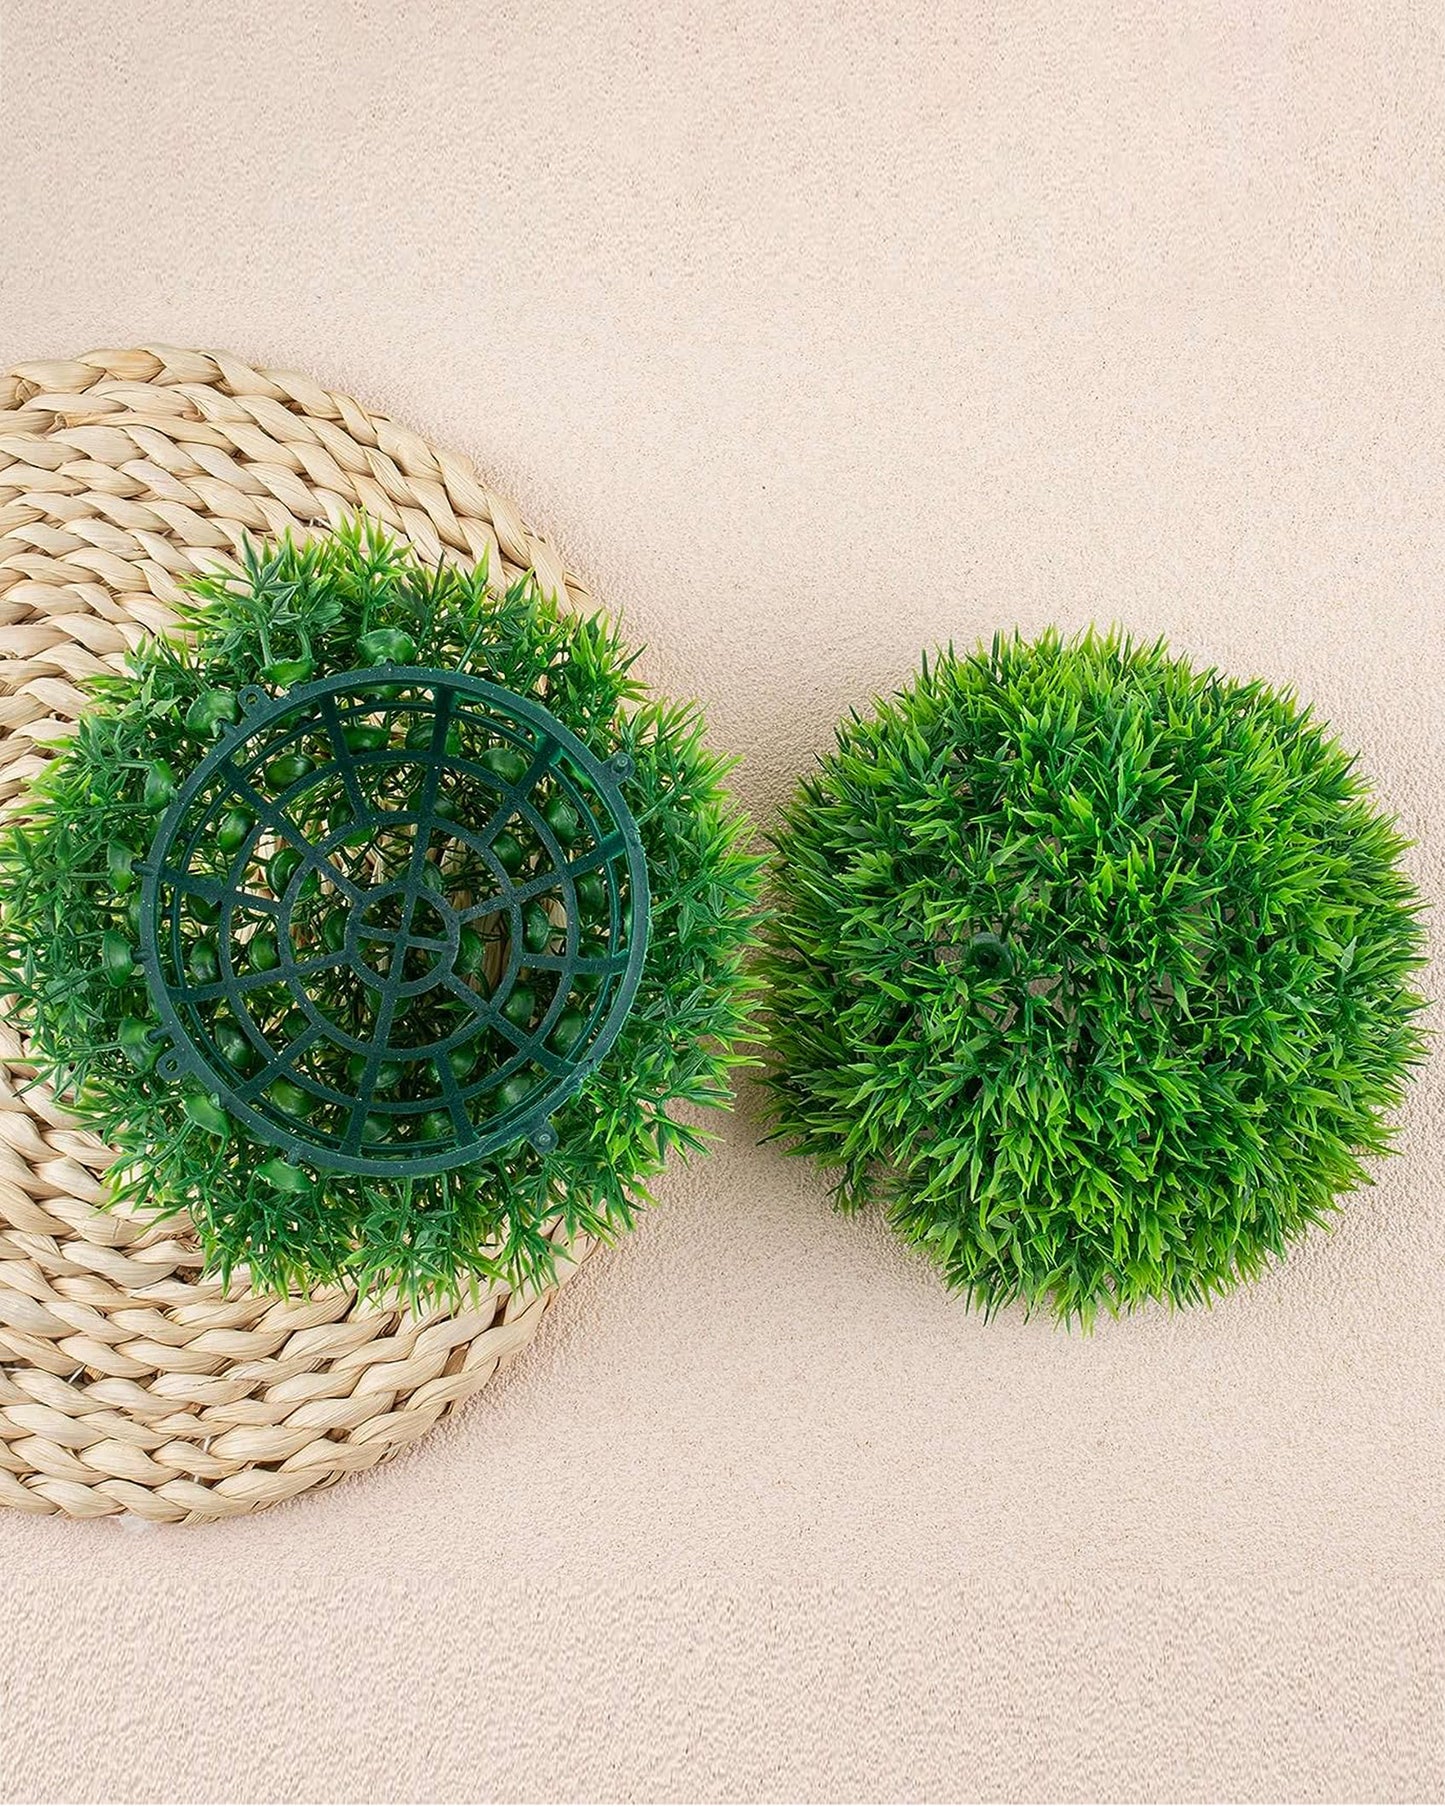 Fake Plants for Bathroom/Home Office Decor, Small Artificial Faux Greenery for House Decoration Office Cubicle Shelf Window, Trimming Ball, set of 4 (Without Pot)